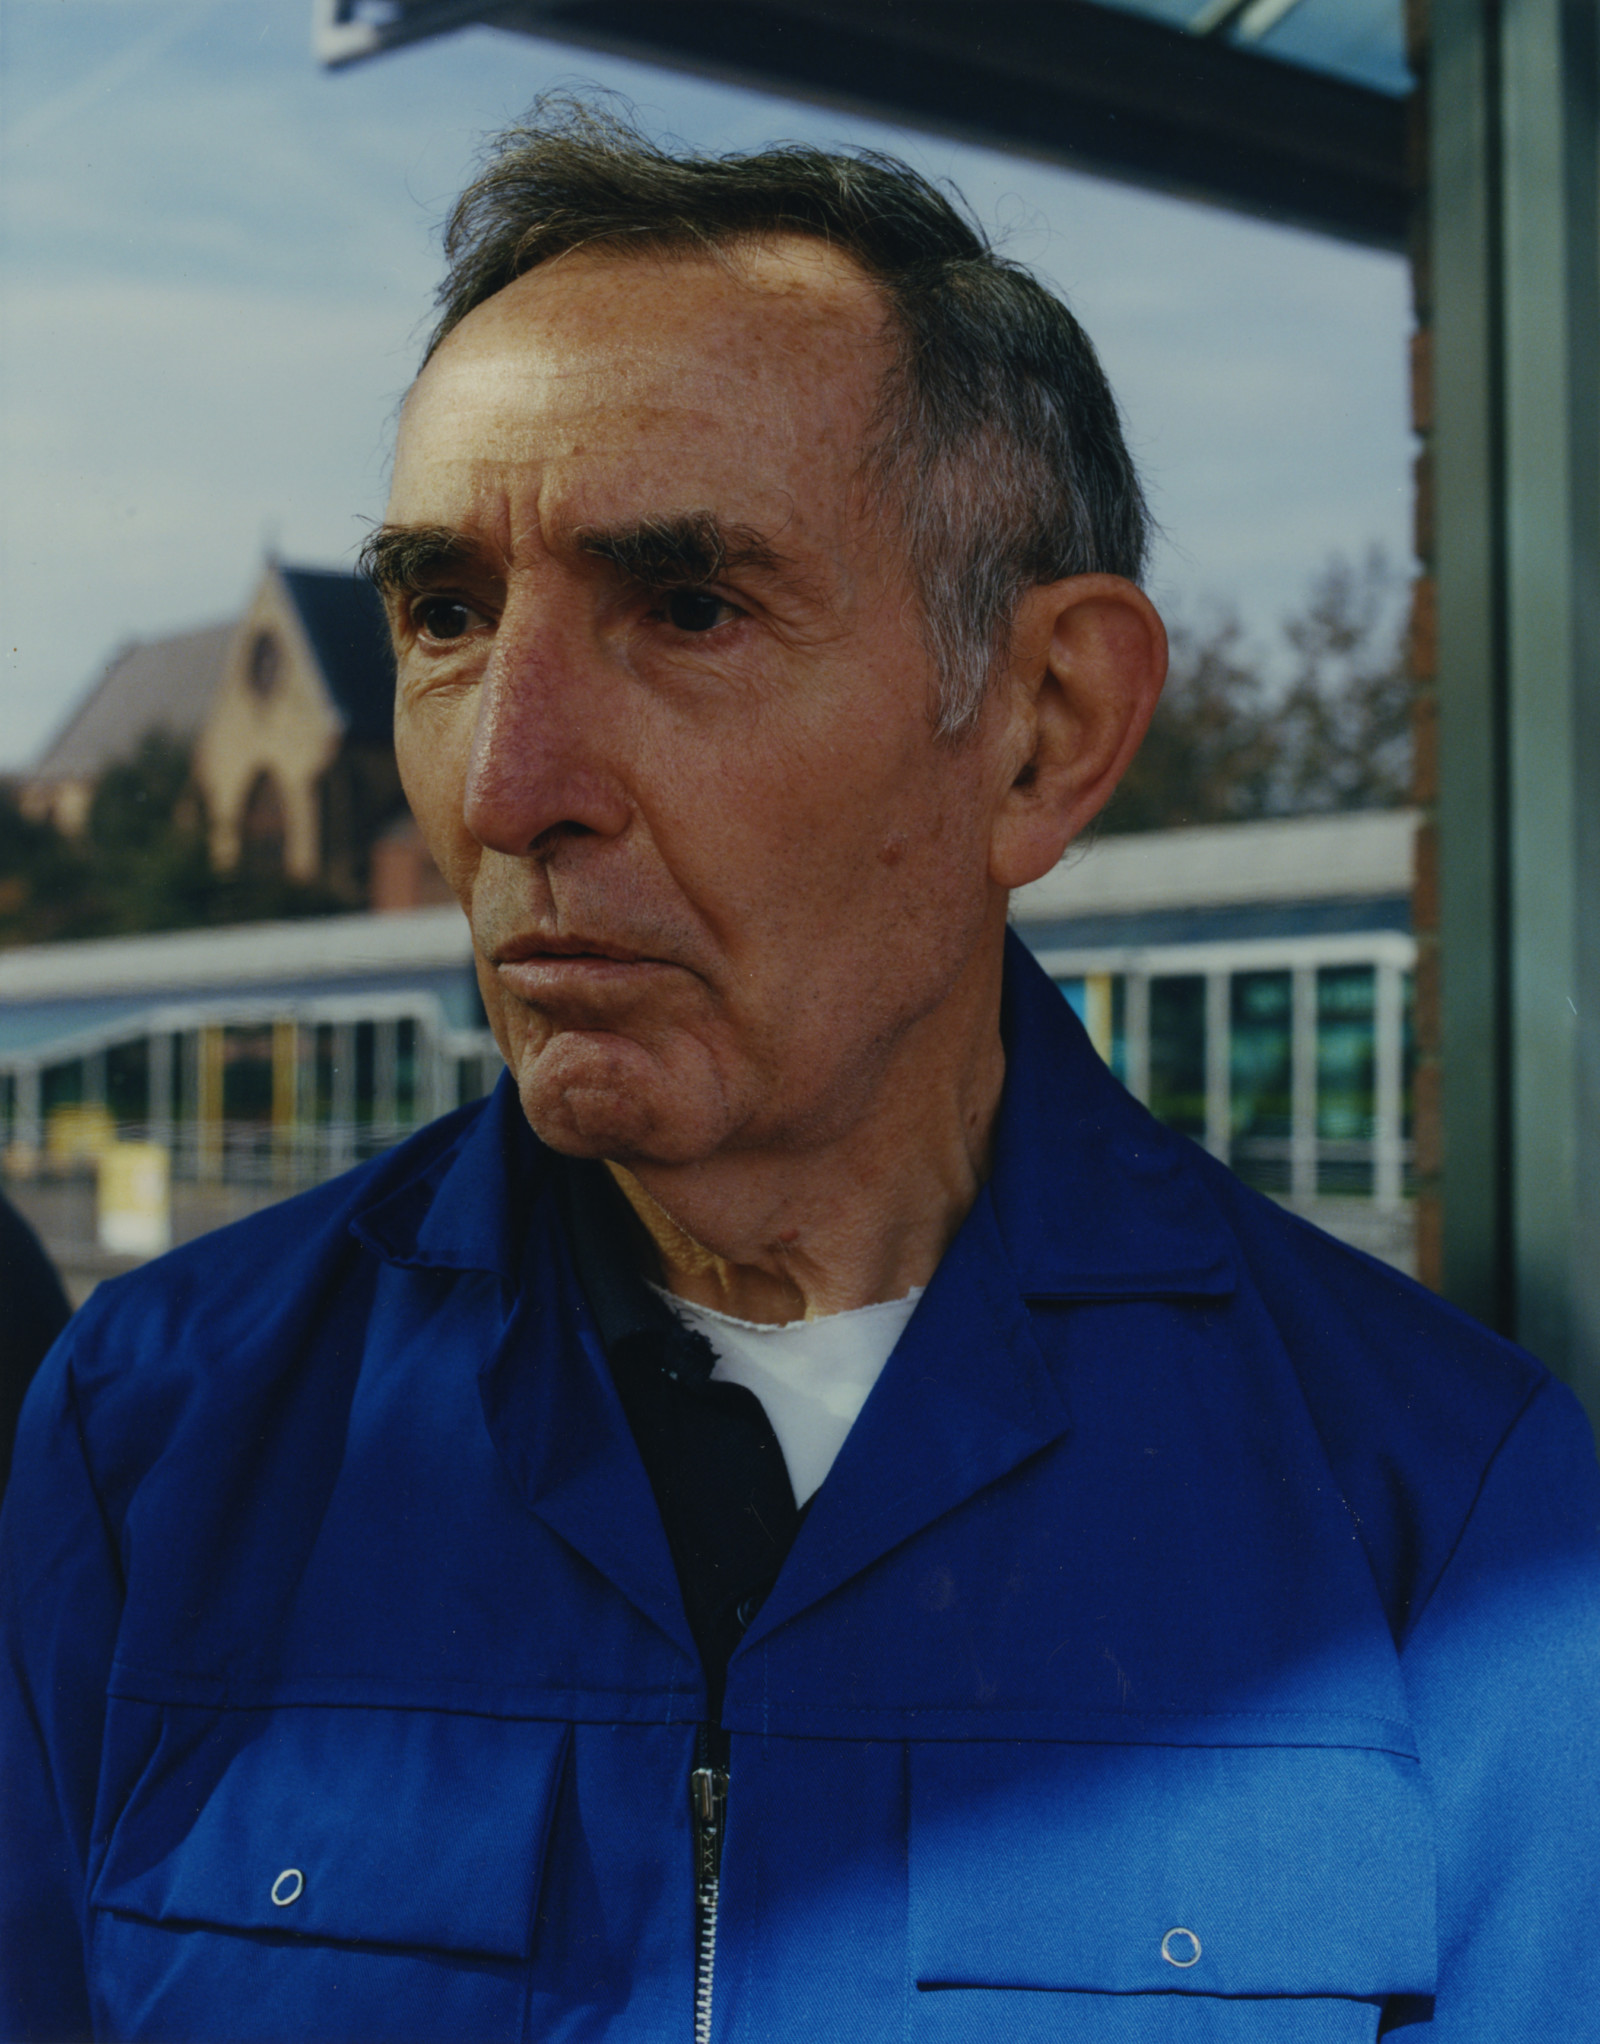 A middle aged man with dark hair, wearing a blue jacket stands at a bus stop